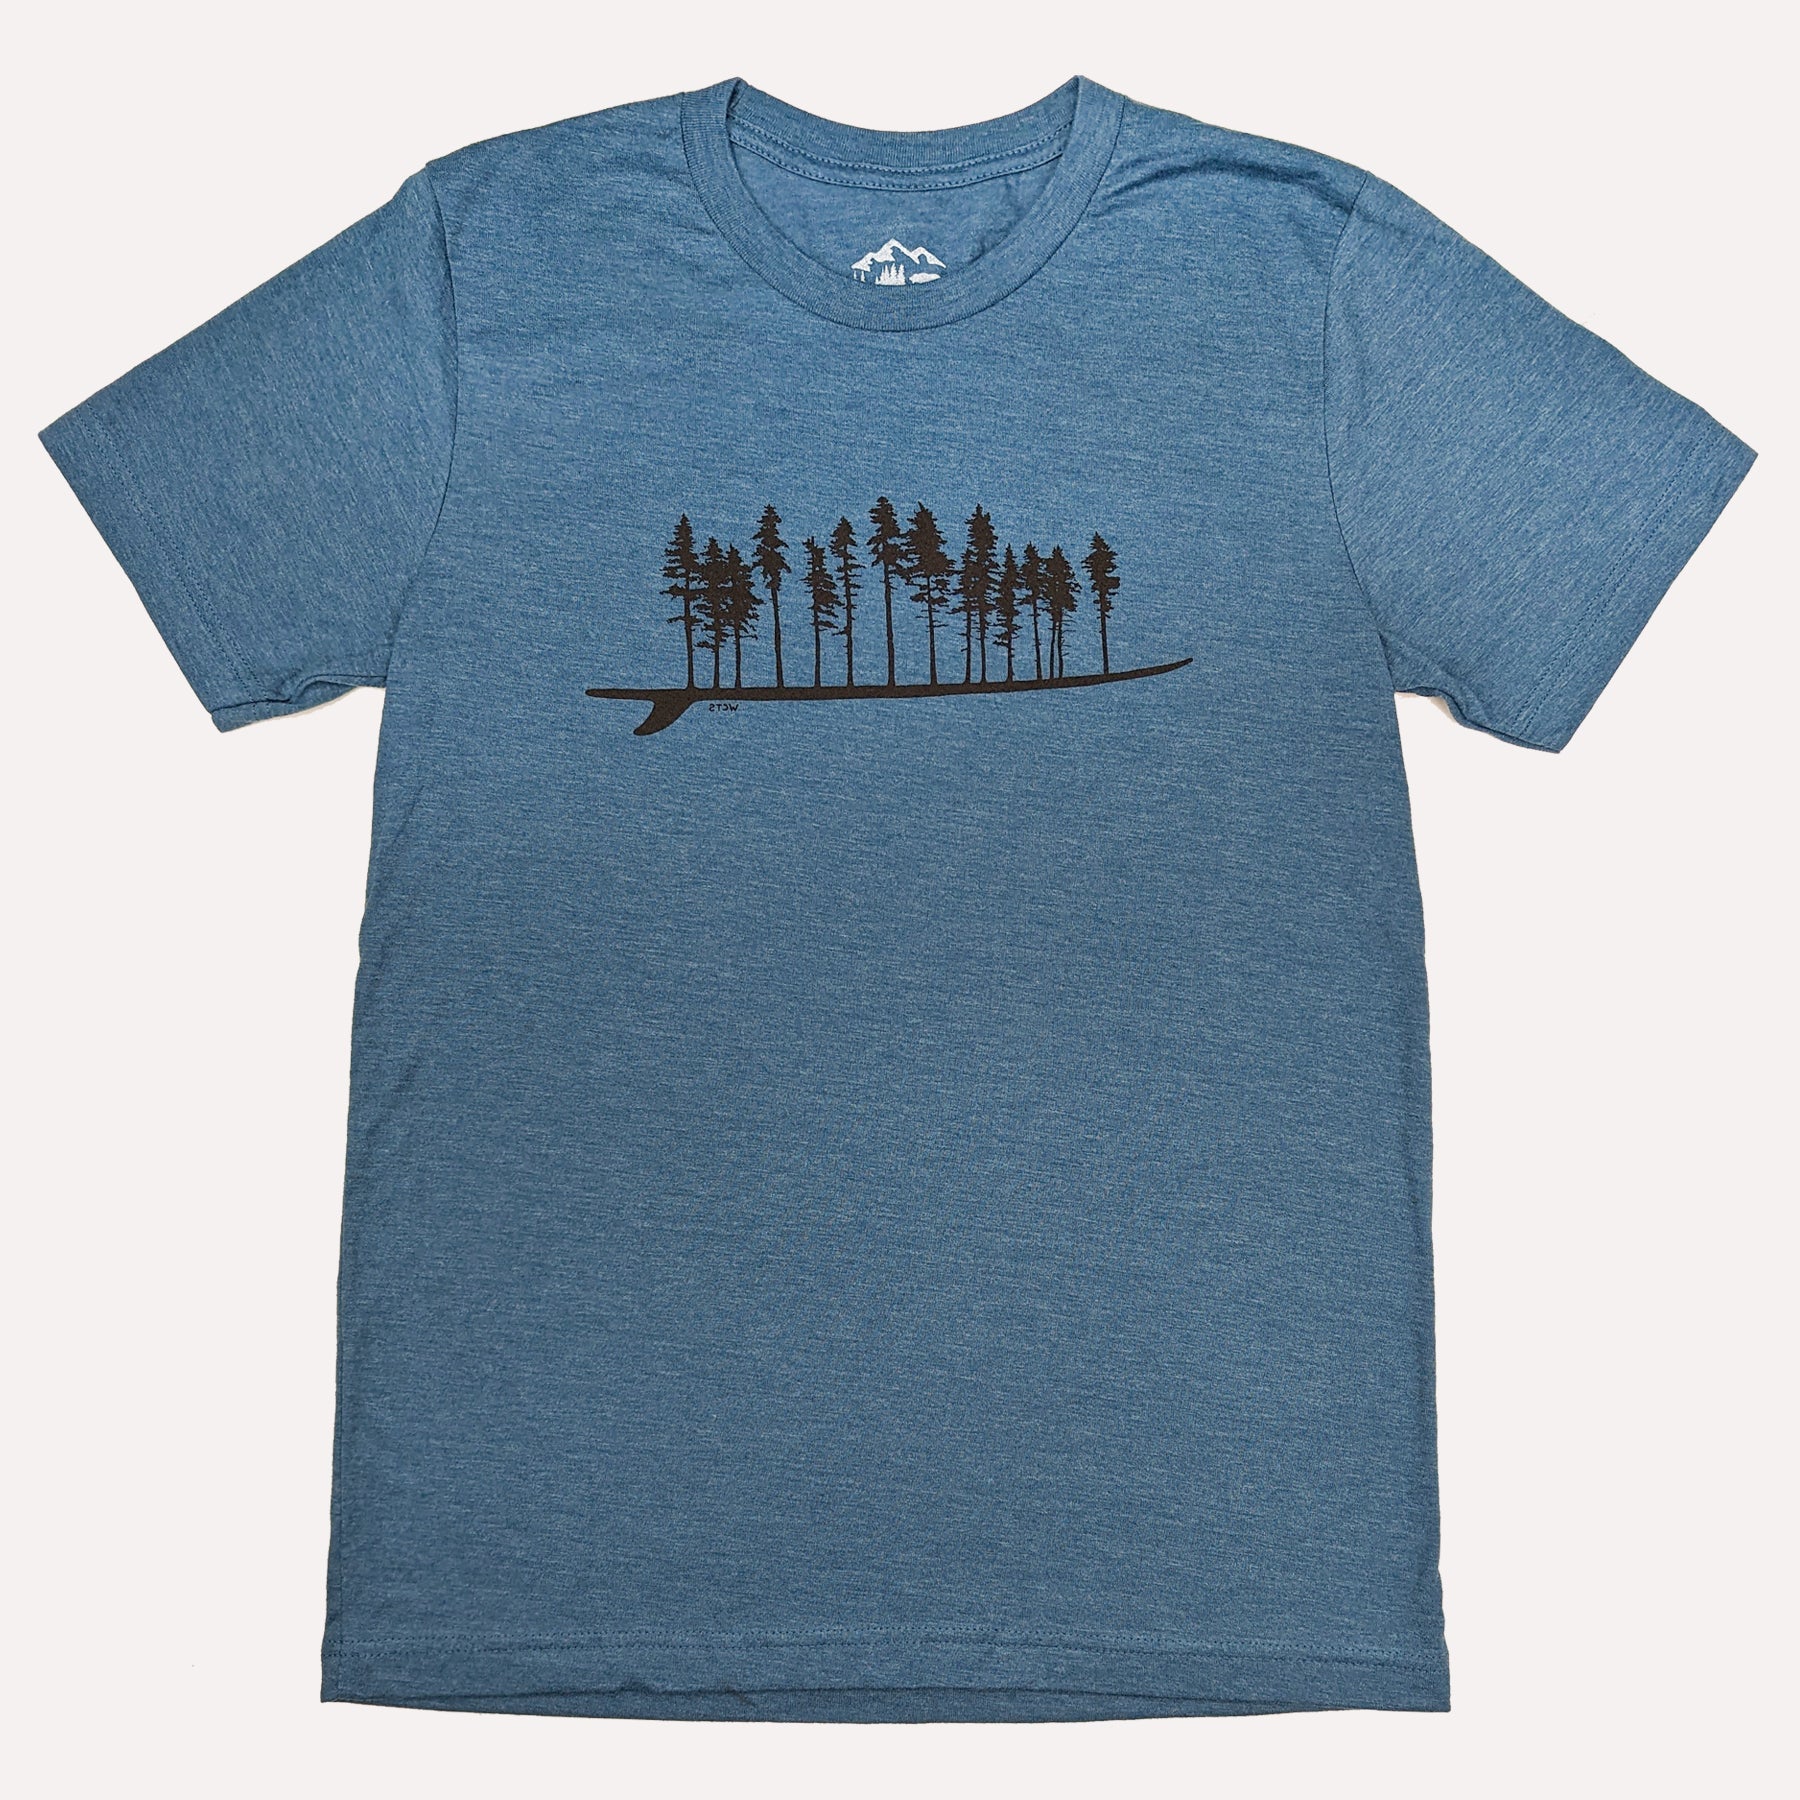 Westcoastees T-Shirt Forest Surfboard - Westcoastees T-Shirt Forest Surfboard -  - House of Himwitsa Native Art Gallery and Gifts